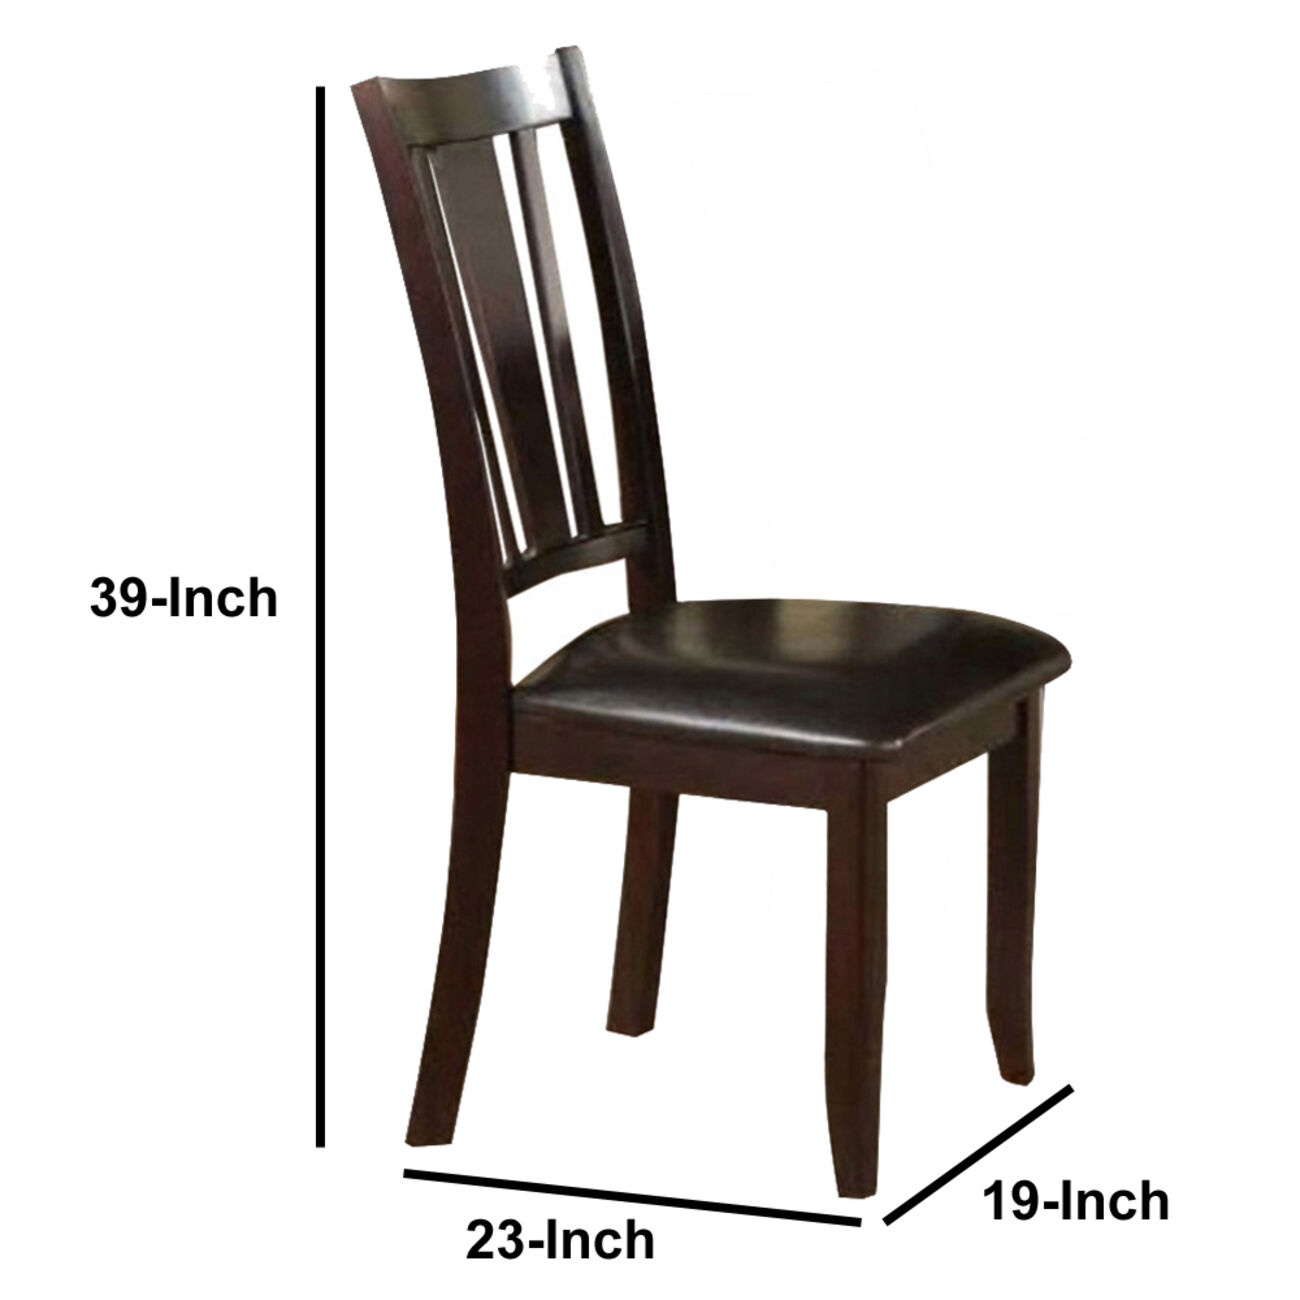 Rubber Wood Dining Chair With Upholstered Seat, Set Of 2,Brown